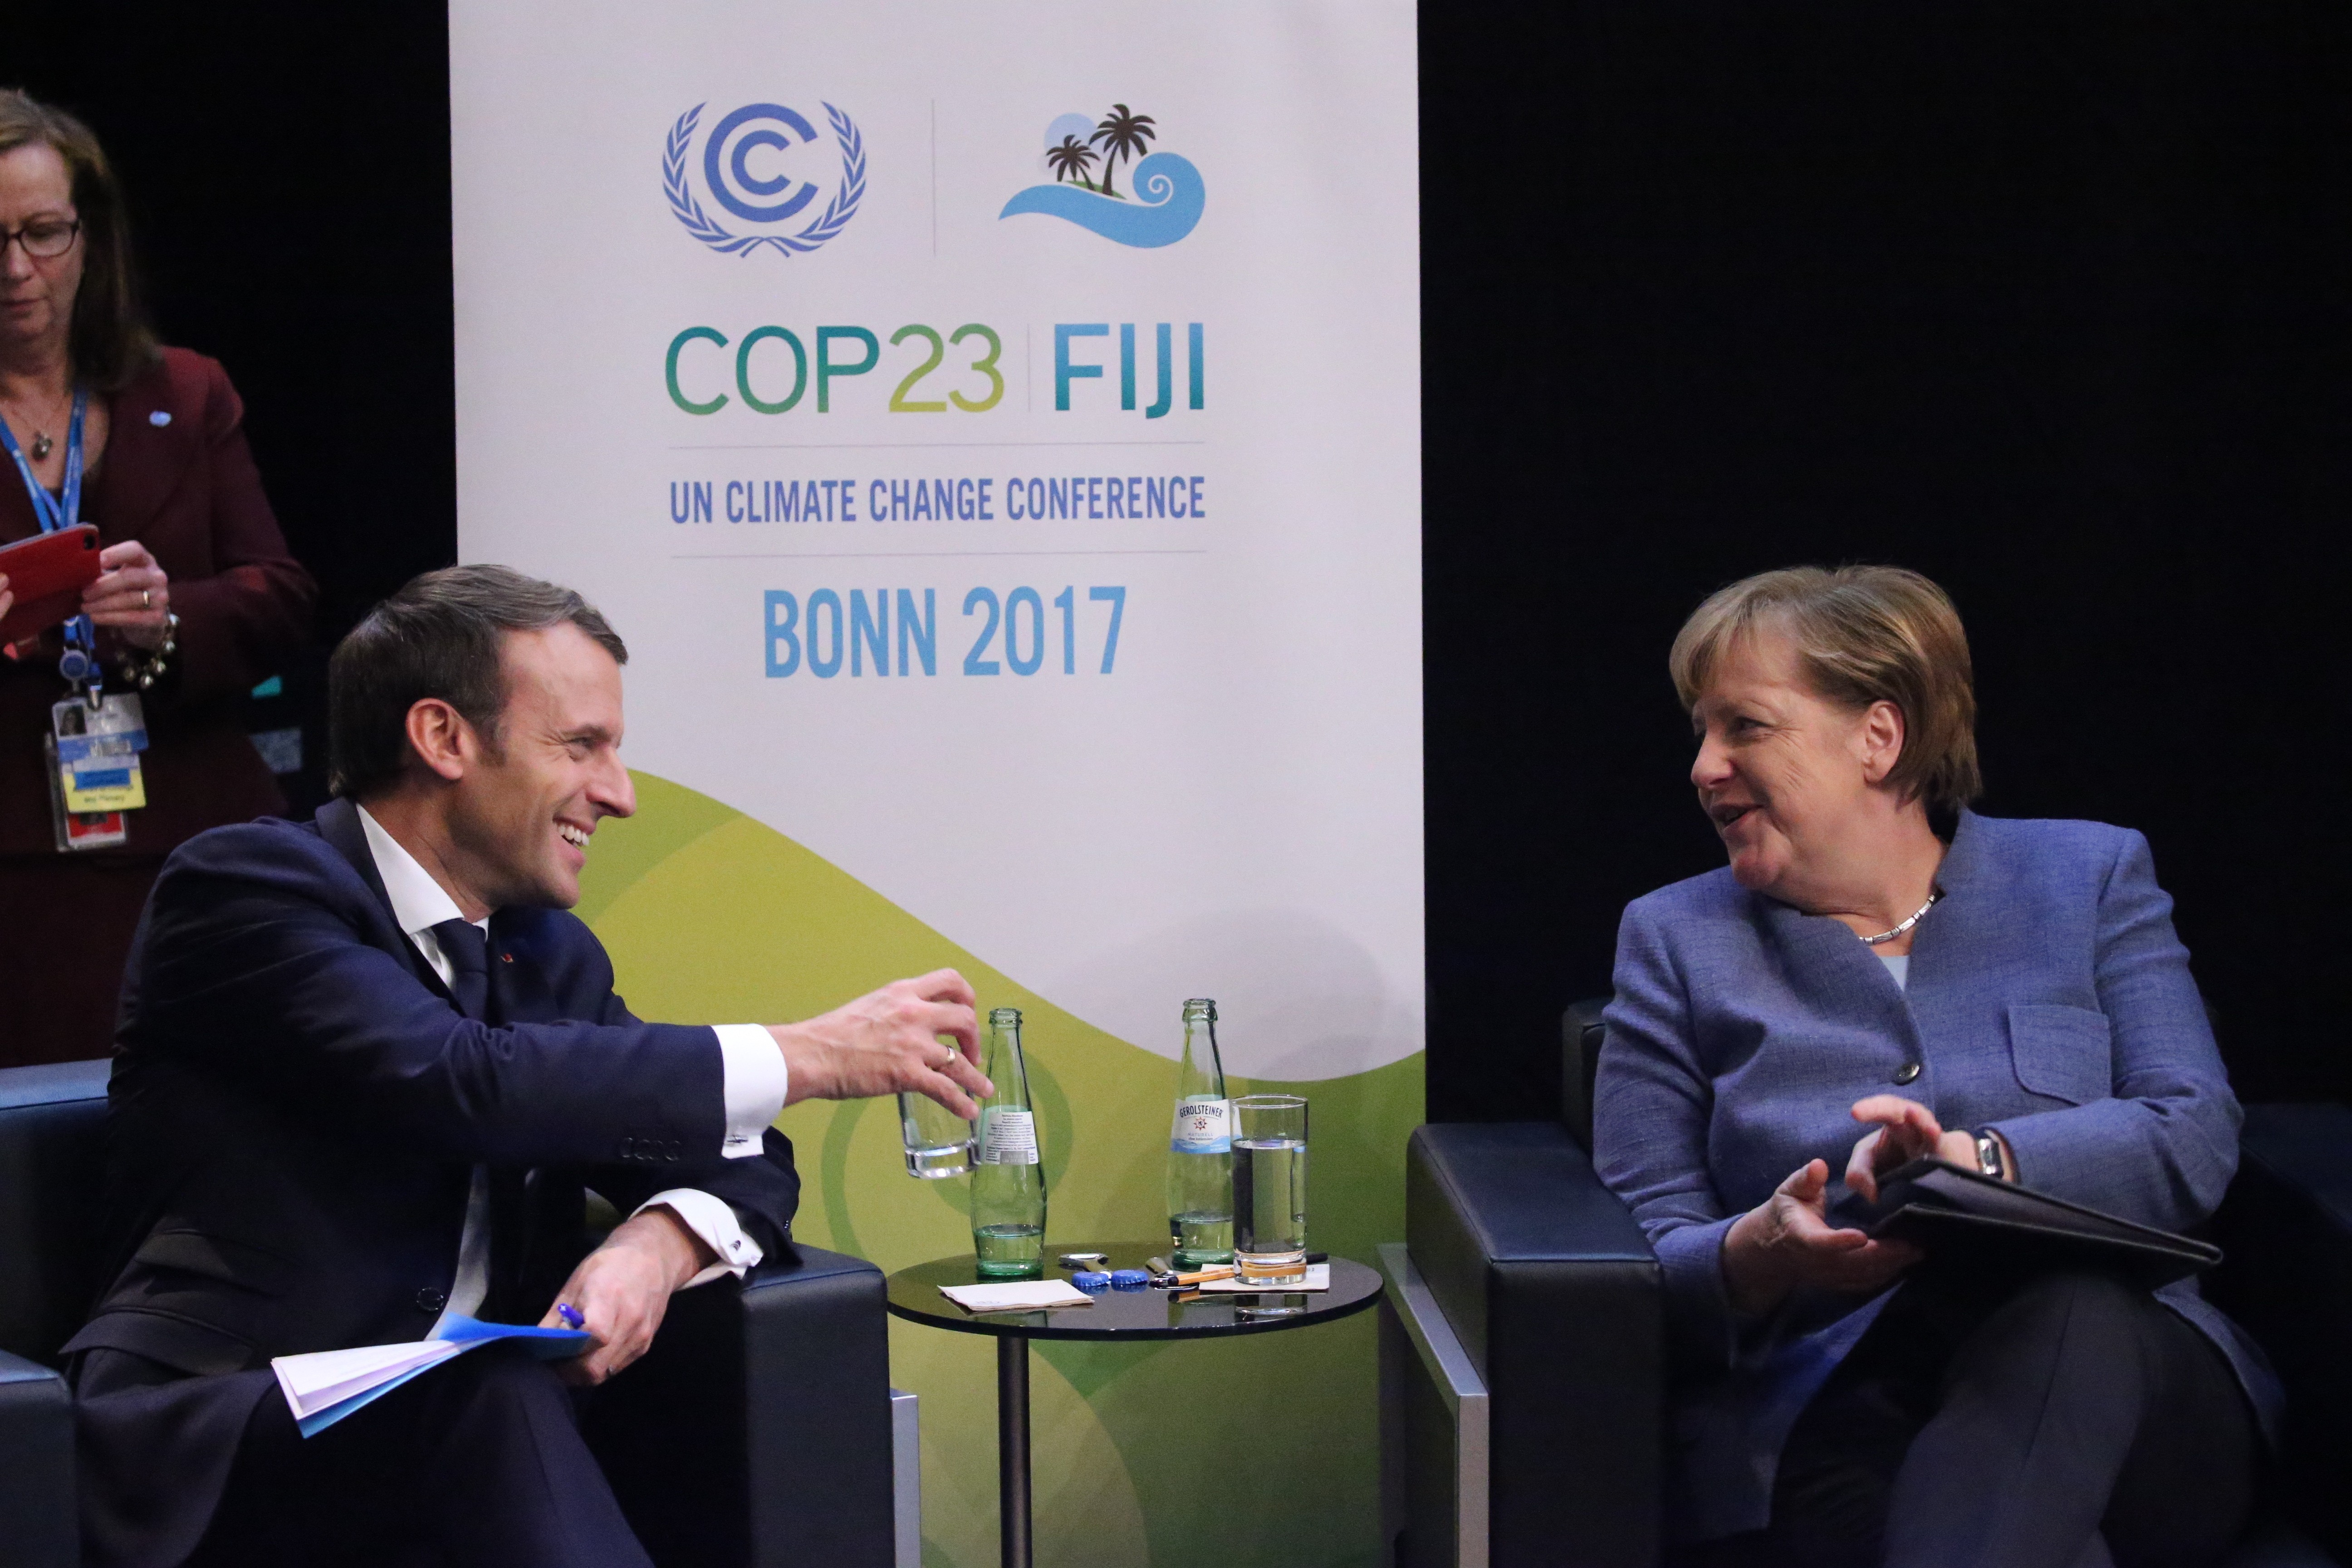 German Chancellor Angela Merkel (CDU, R) and the President of France, Emmanuel Macron, speak with each other during the World Climate Conference in Bonn, Germany, 15 November 2017. The COP23 World Climate Conference takes place in Bonn between 06 and 17 November. Photo by: Oliver Berg/picture-alliance/dpa/AP Images